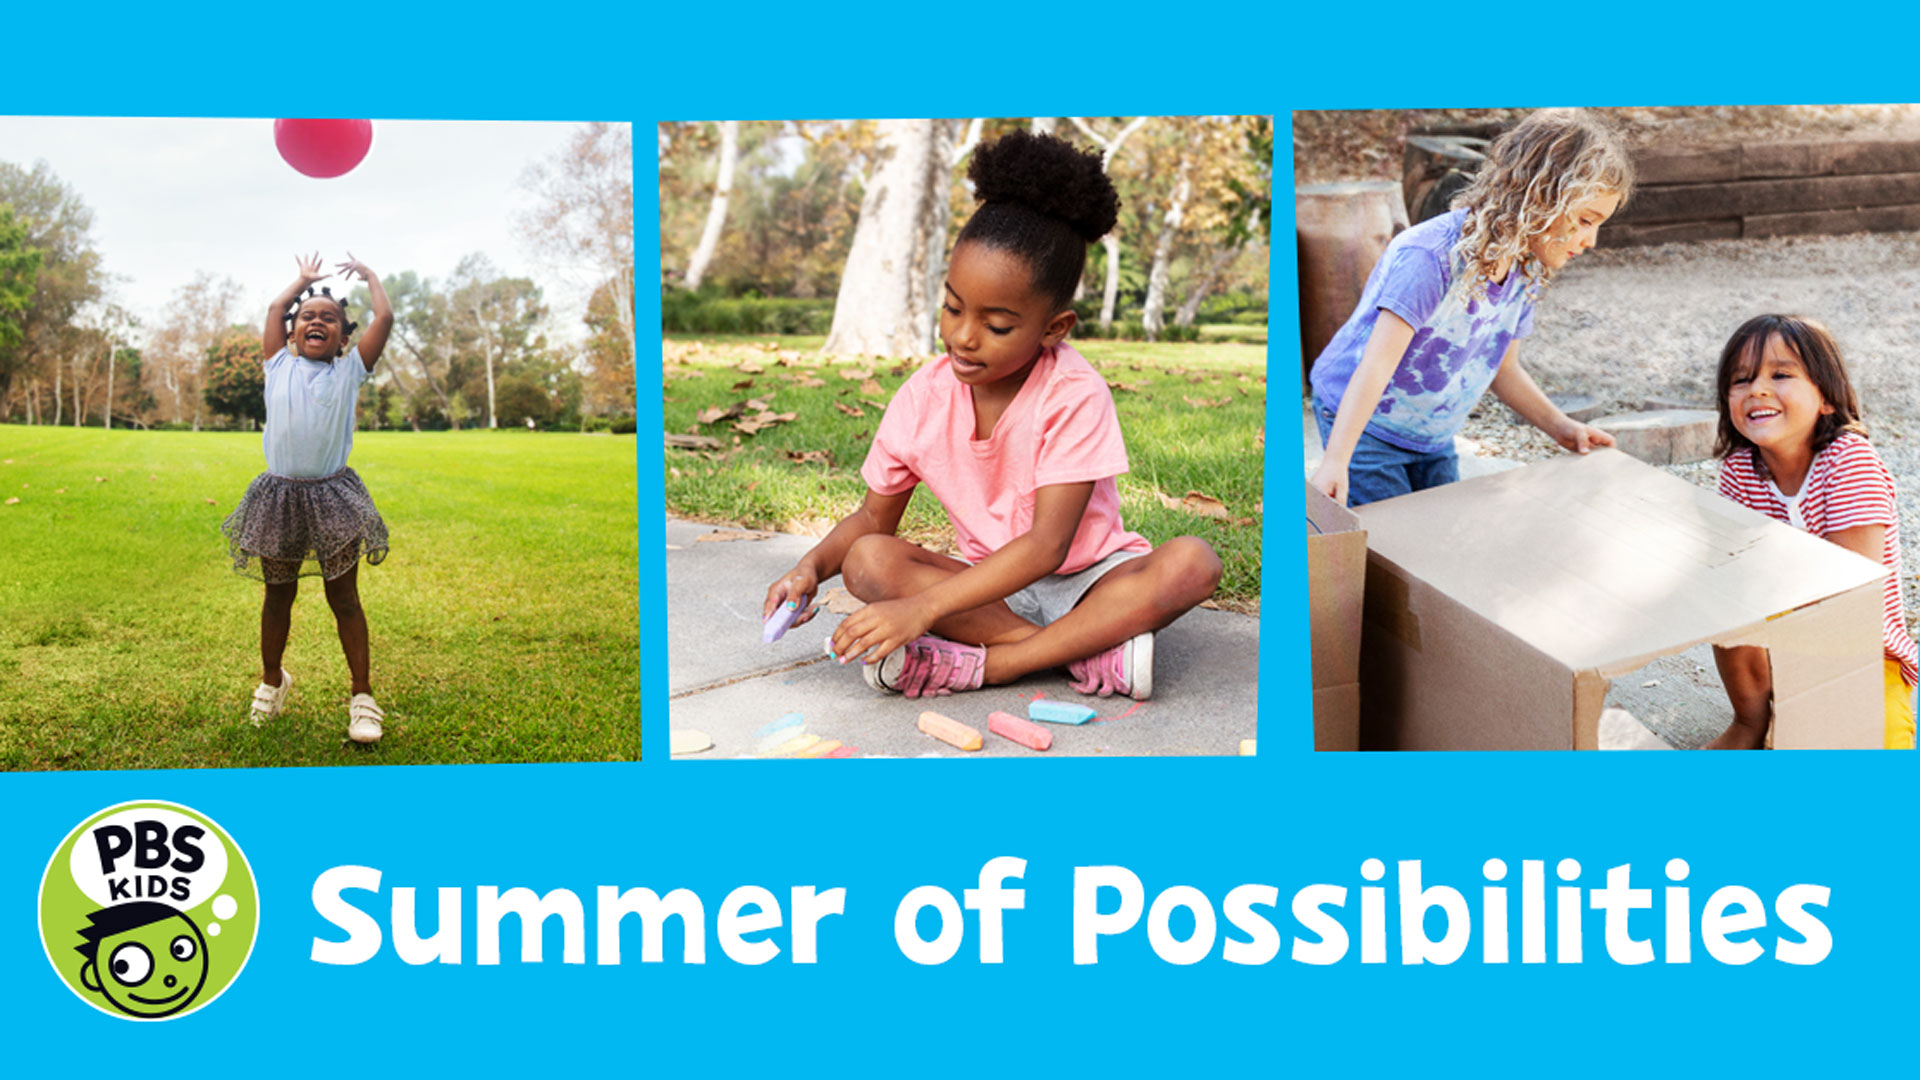 PBS KIDS Summer of Possibility